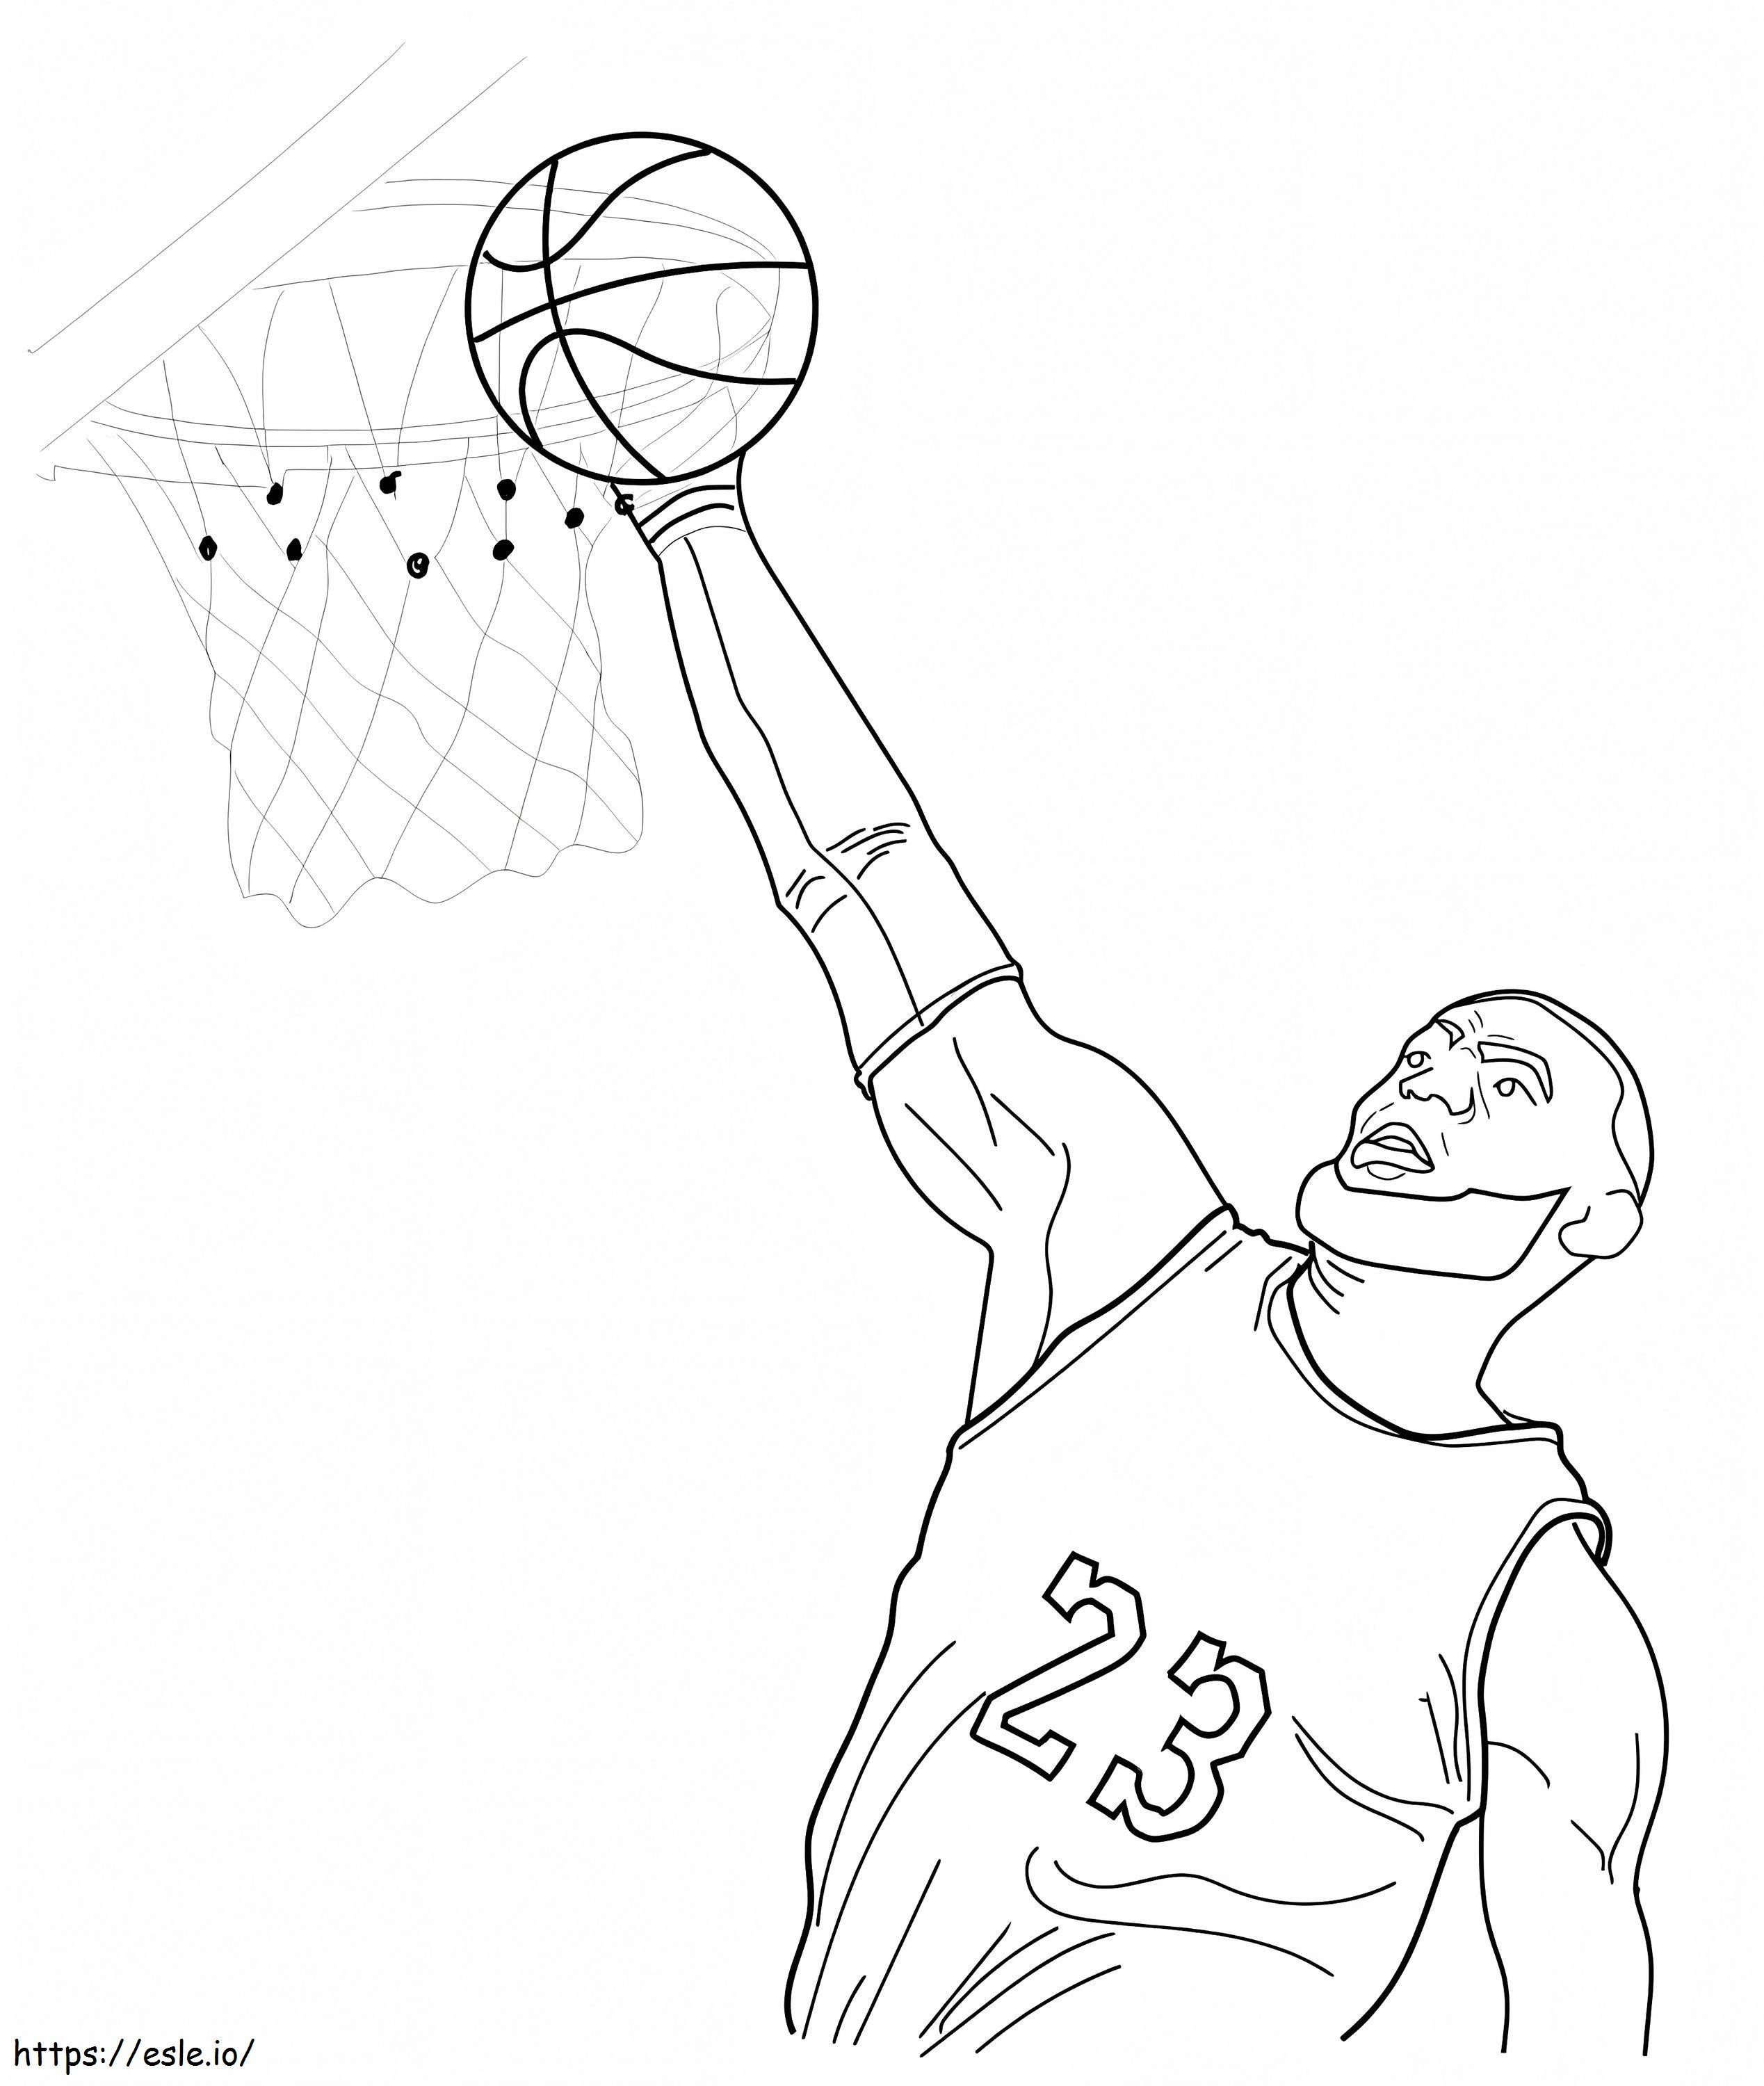 Lebron james dunking coloring page